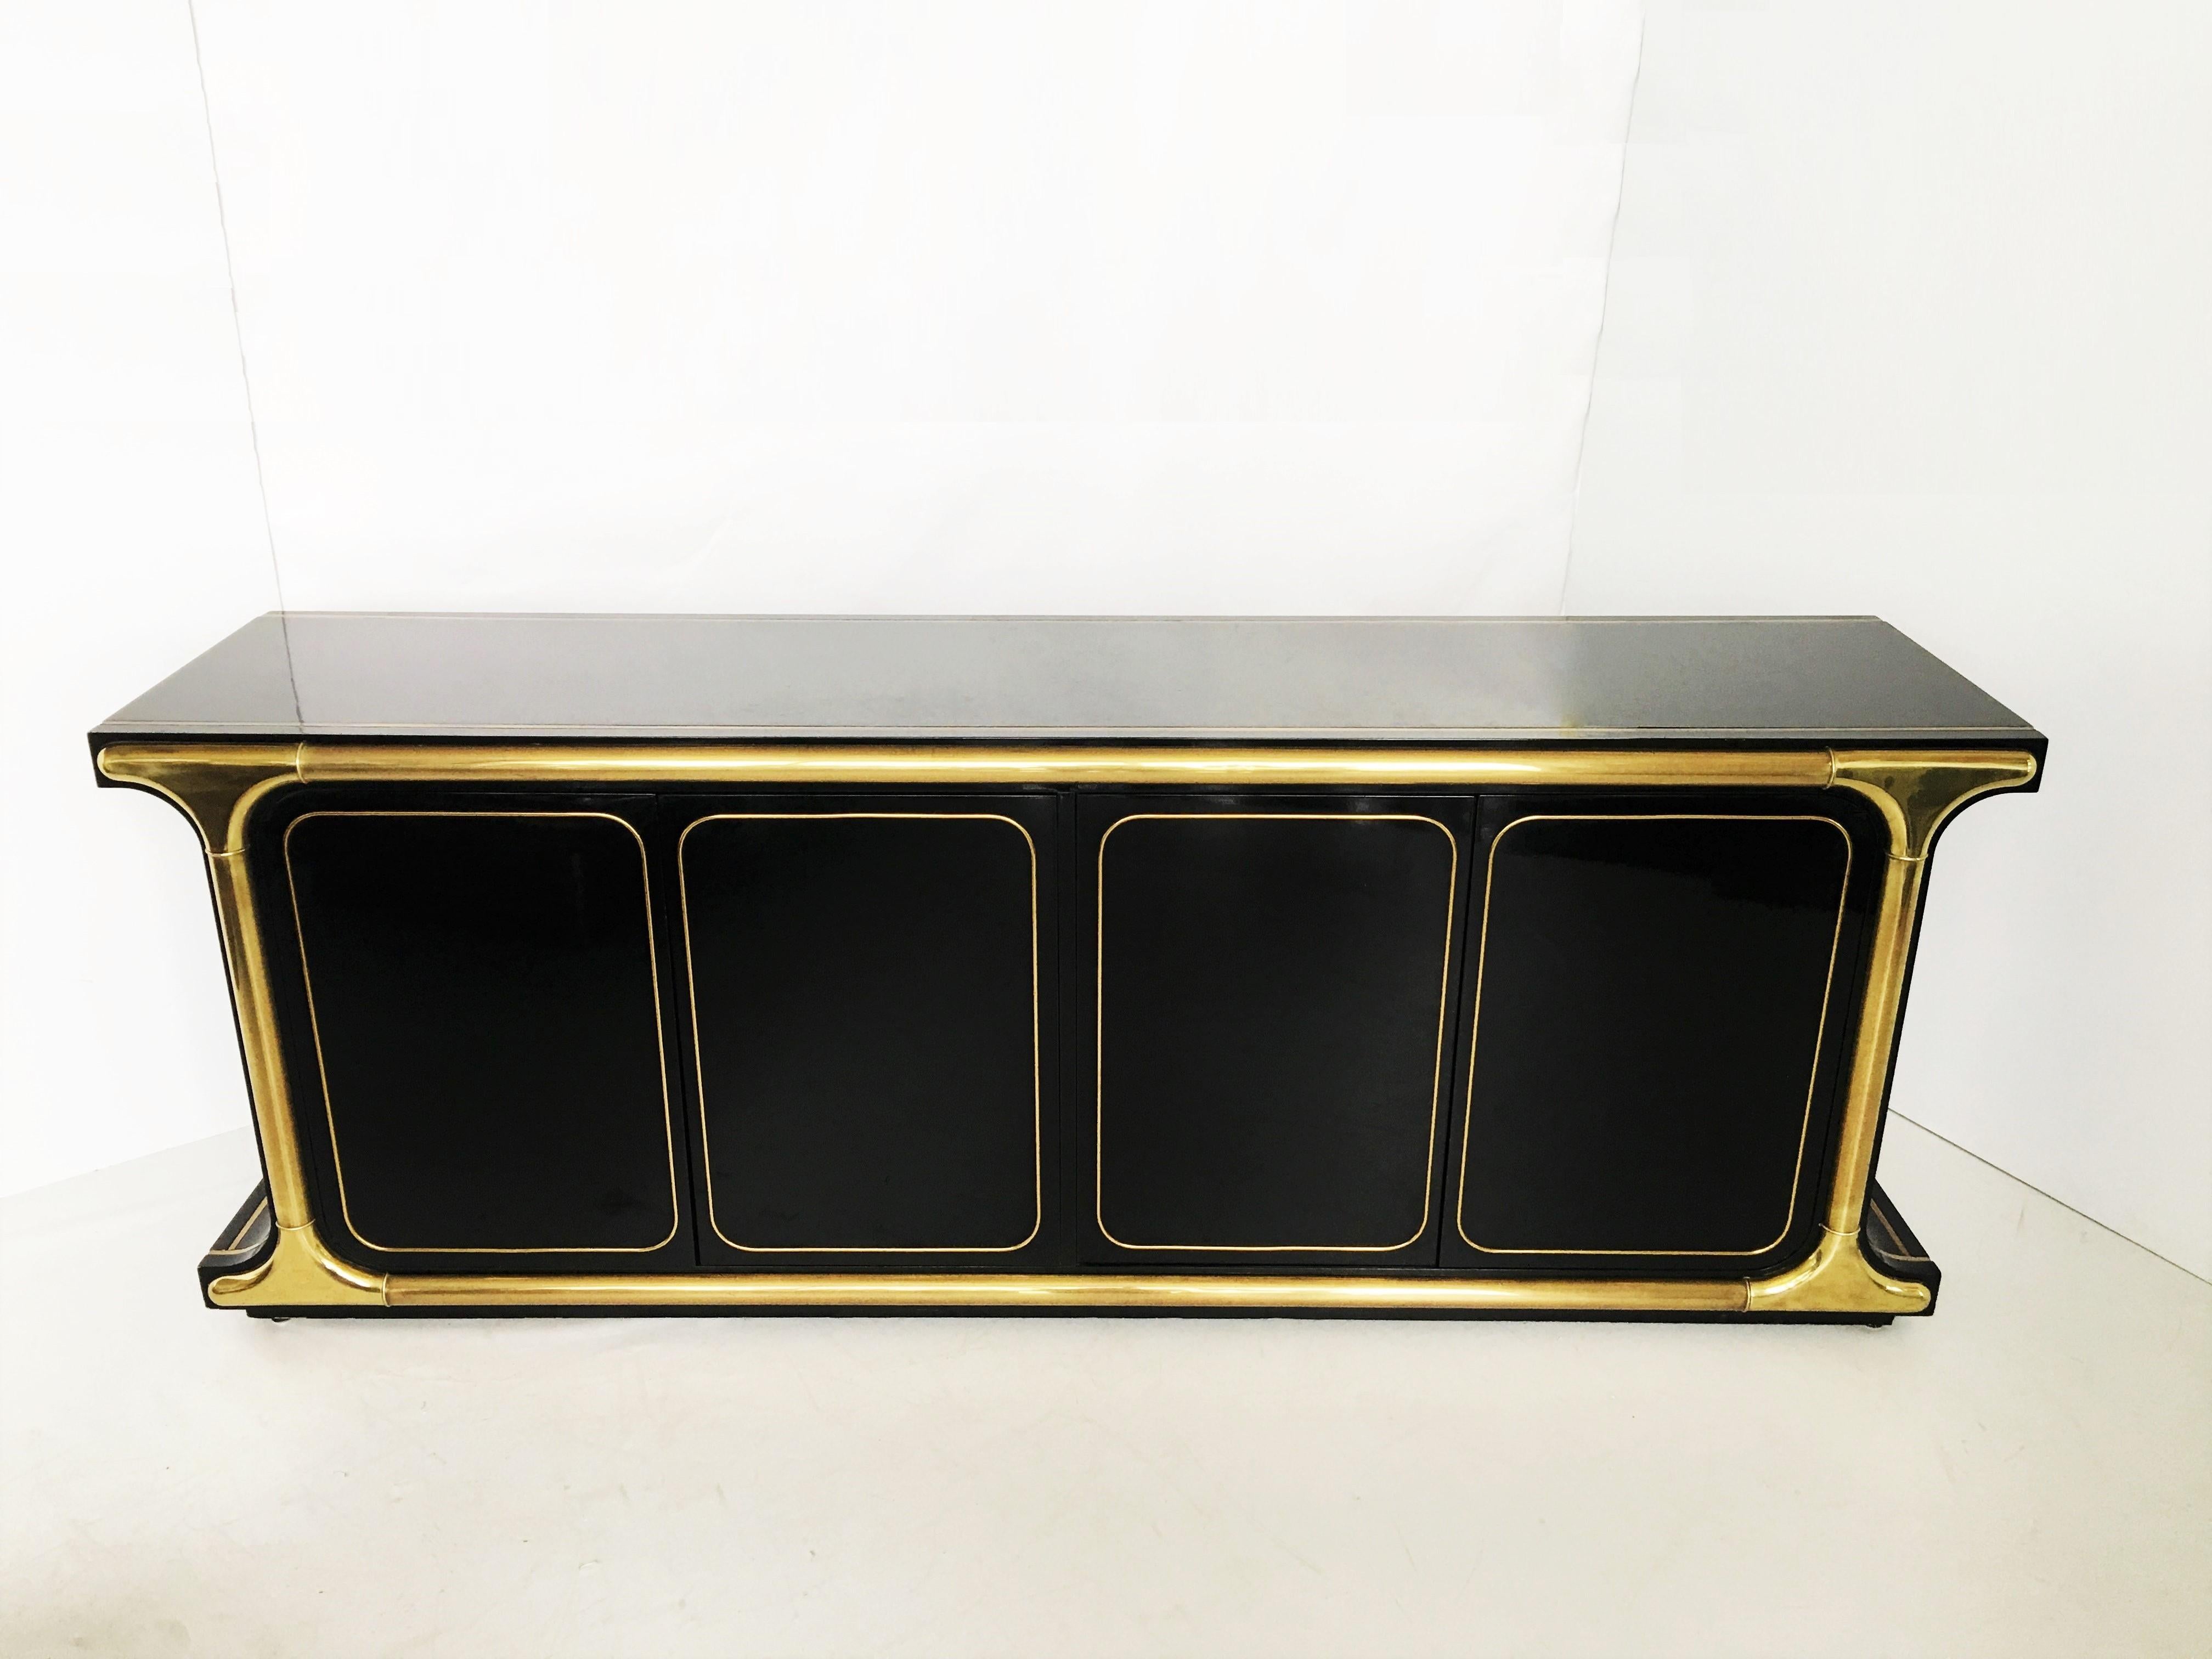 An exquisite one of a kind piece designed by the great Mastercraft in Grand Rapids. Features a black lacquer body, both sides have a gentle curve. Substantial brass trim pieces and graphic brass inlays. Each side has a pair of touch-latch doors that